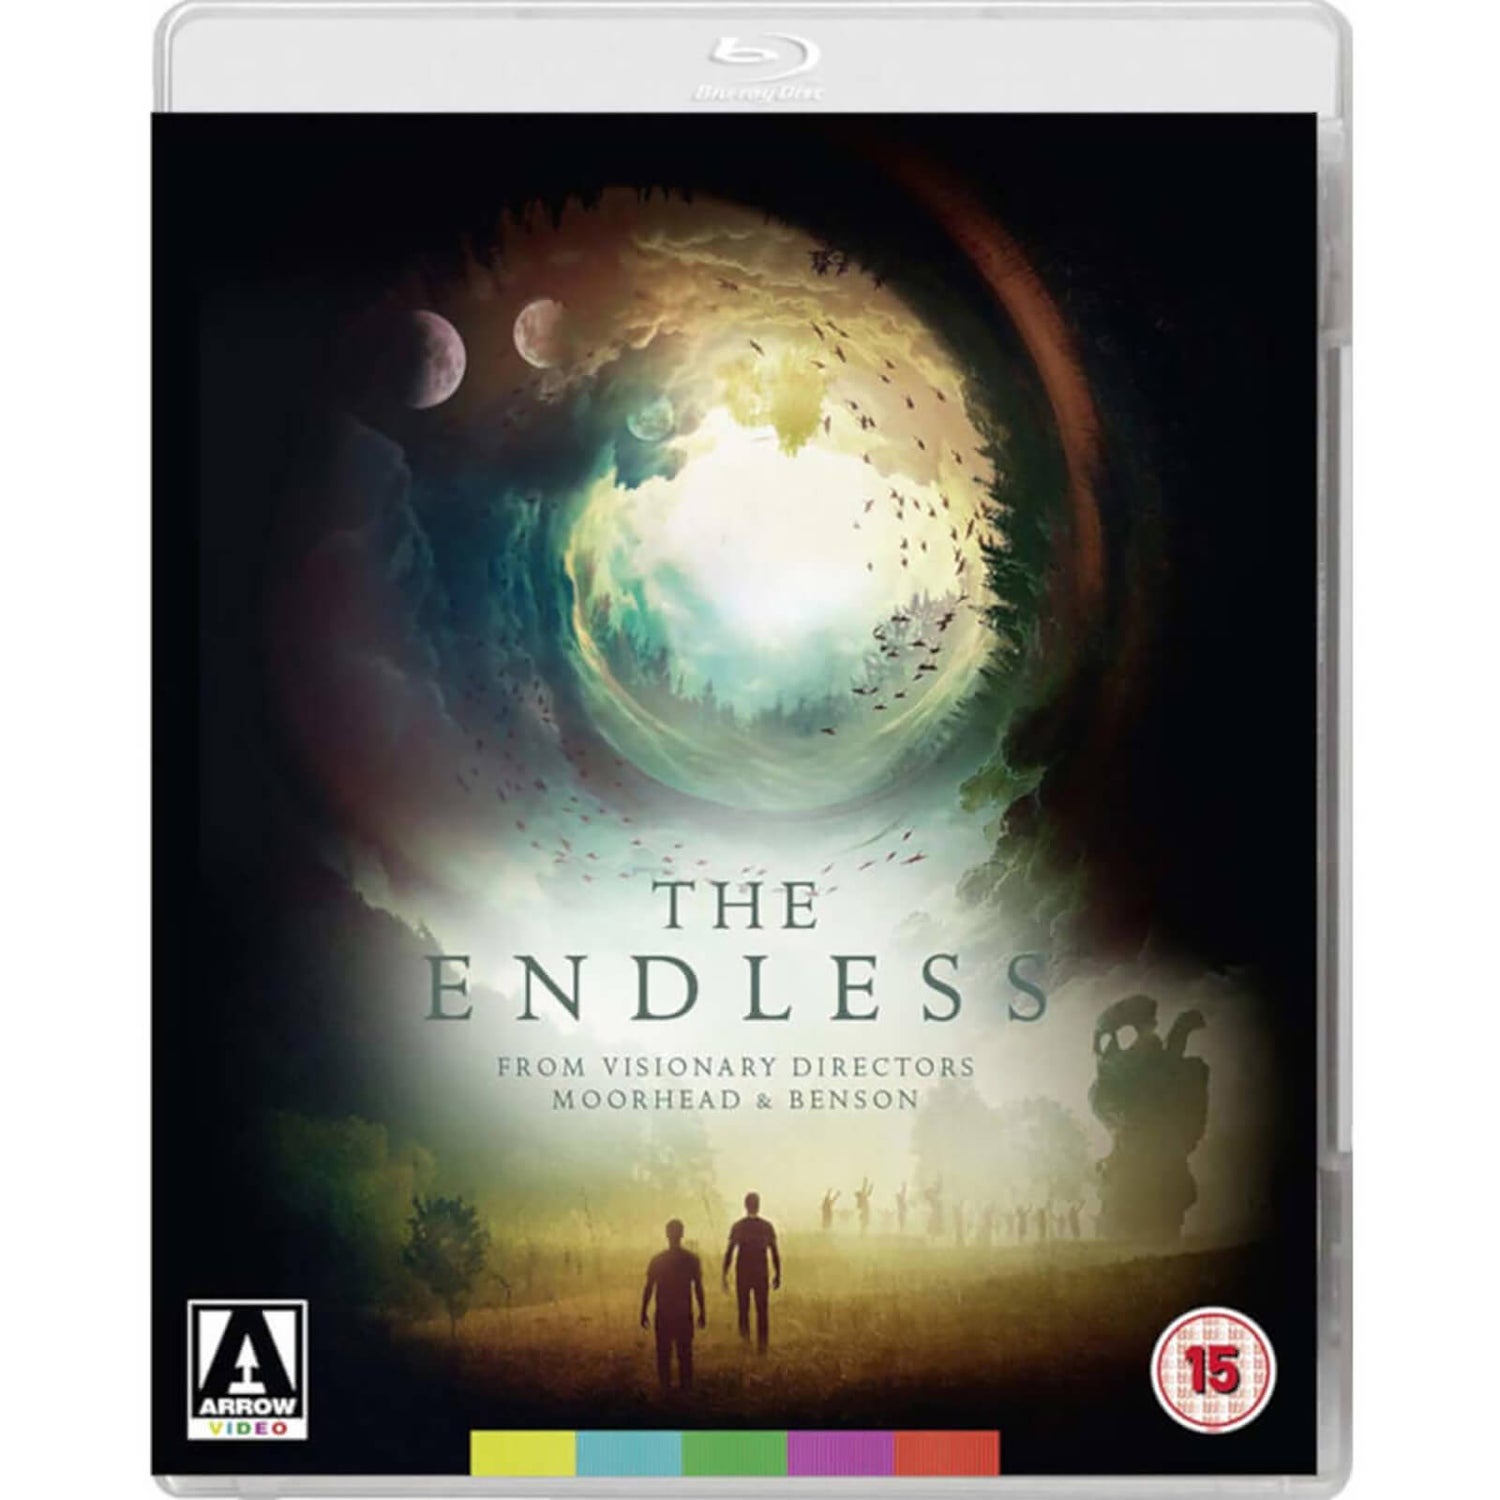 The Endless Blu-ray